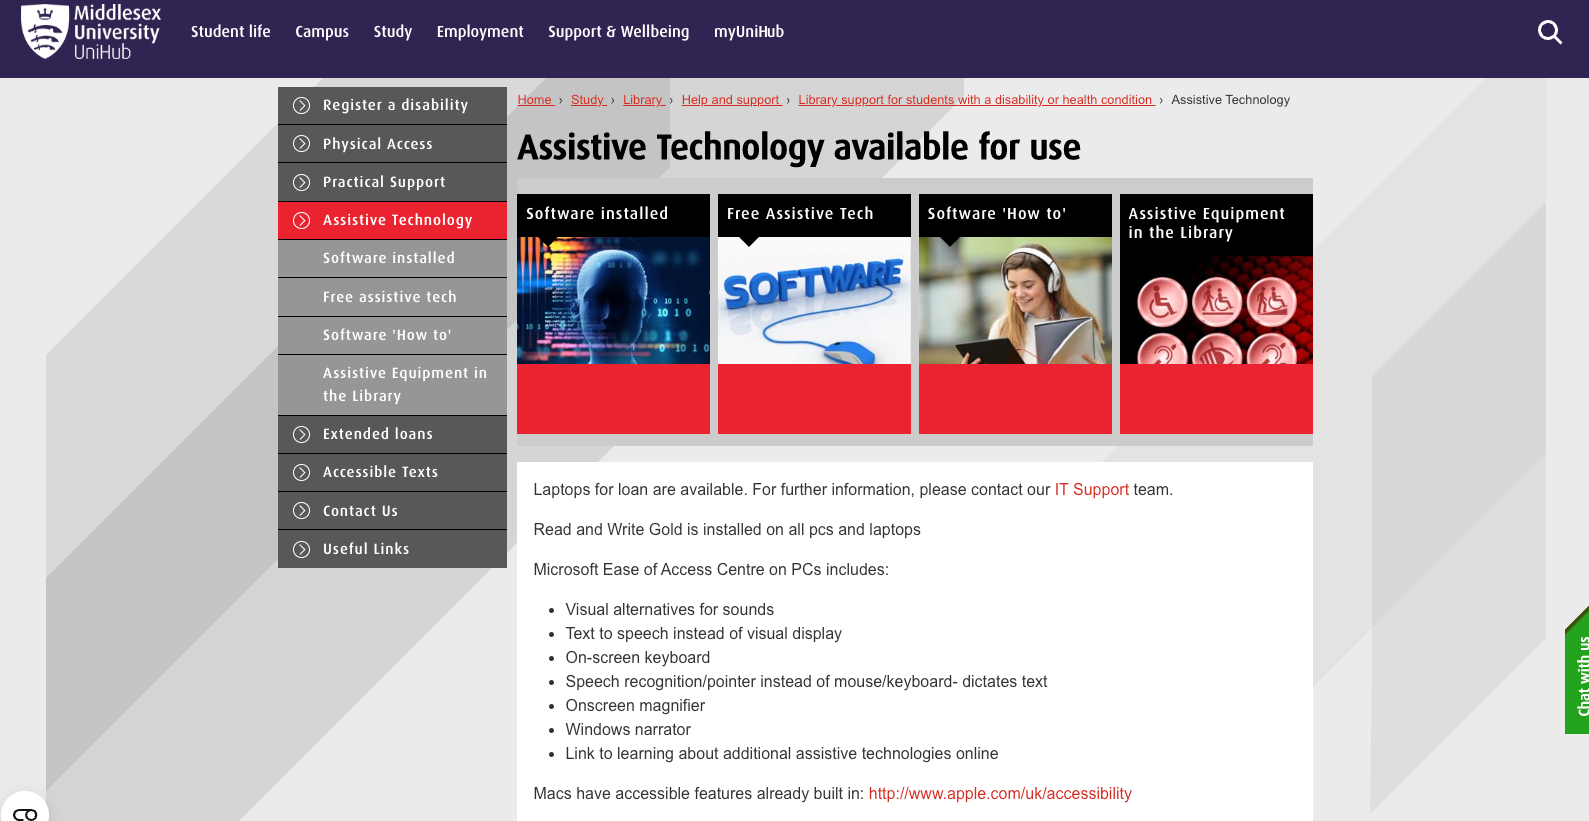 Middlesex University Accessibility Hub